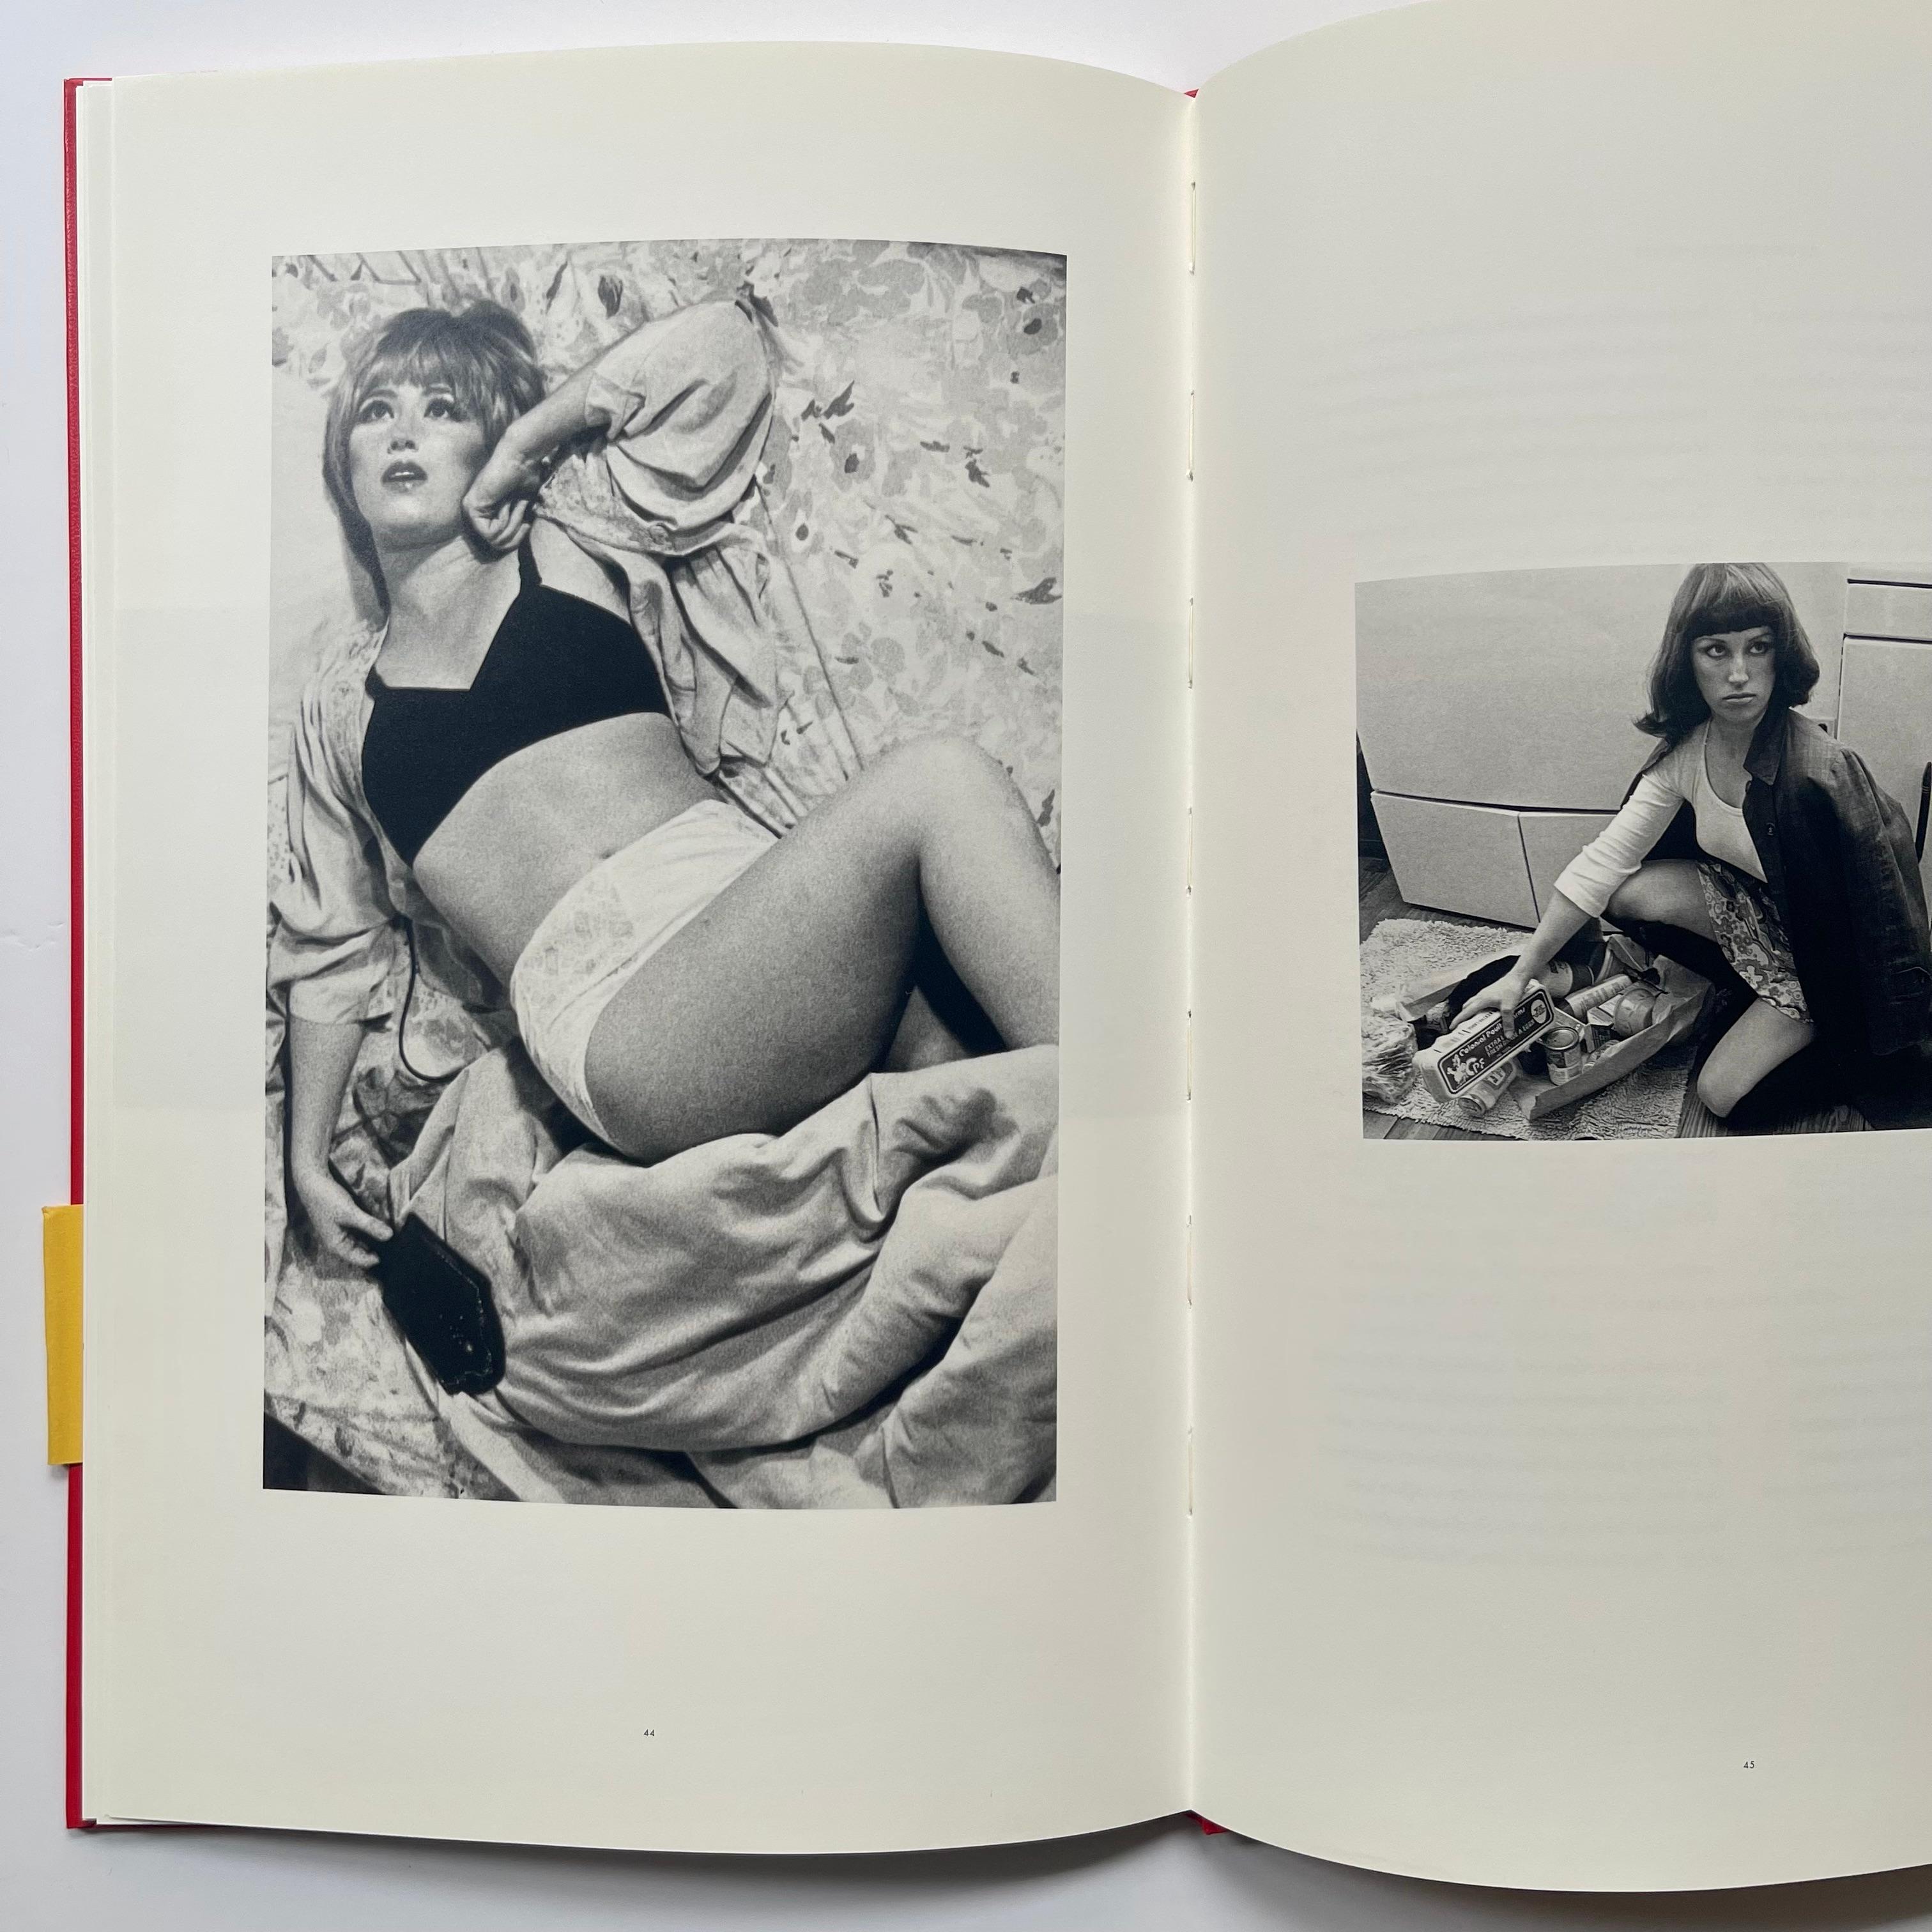 Swedish The Hasselblad Award 1999: Cindy Sherman - 1st Edition, Hasselblad Center, 2000 For Sale